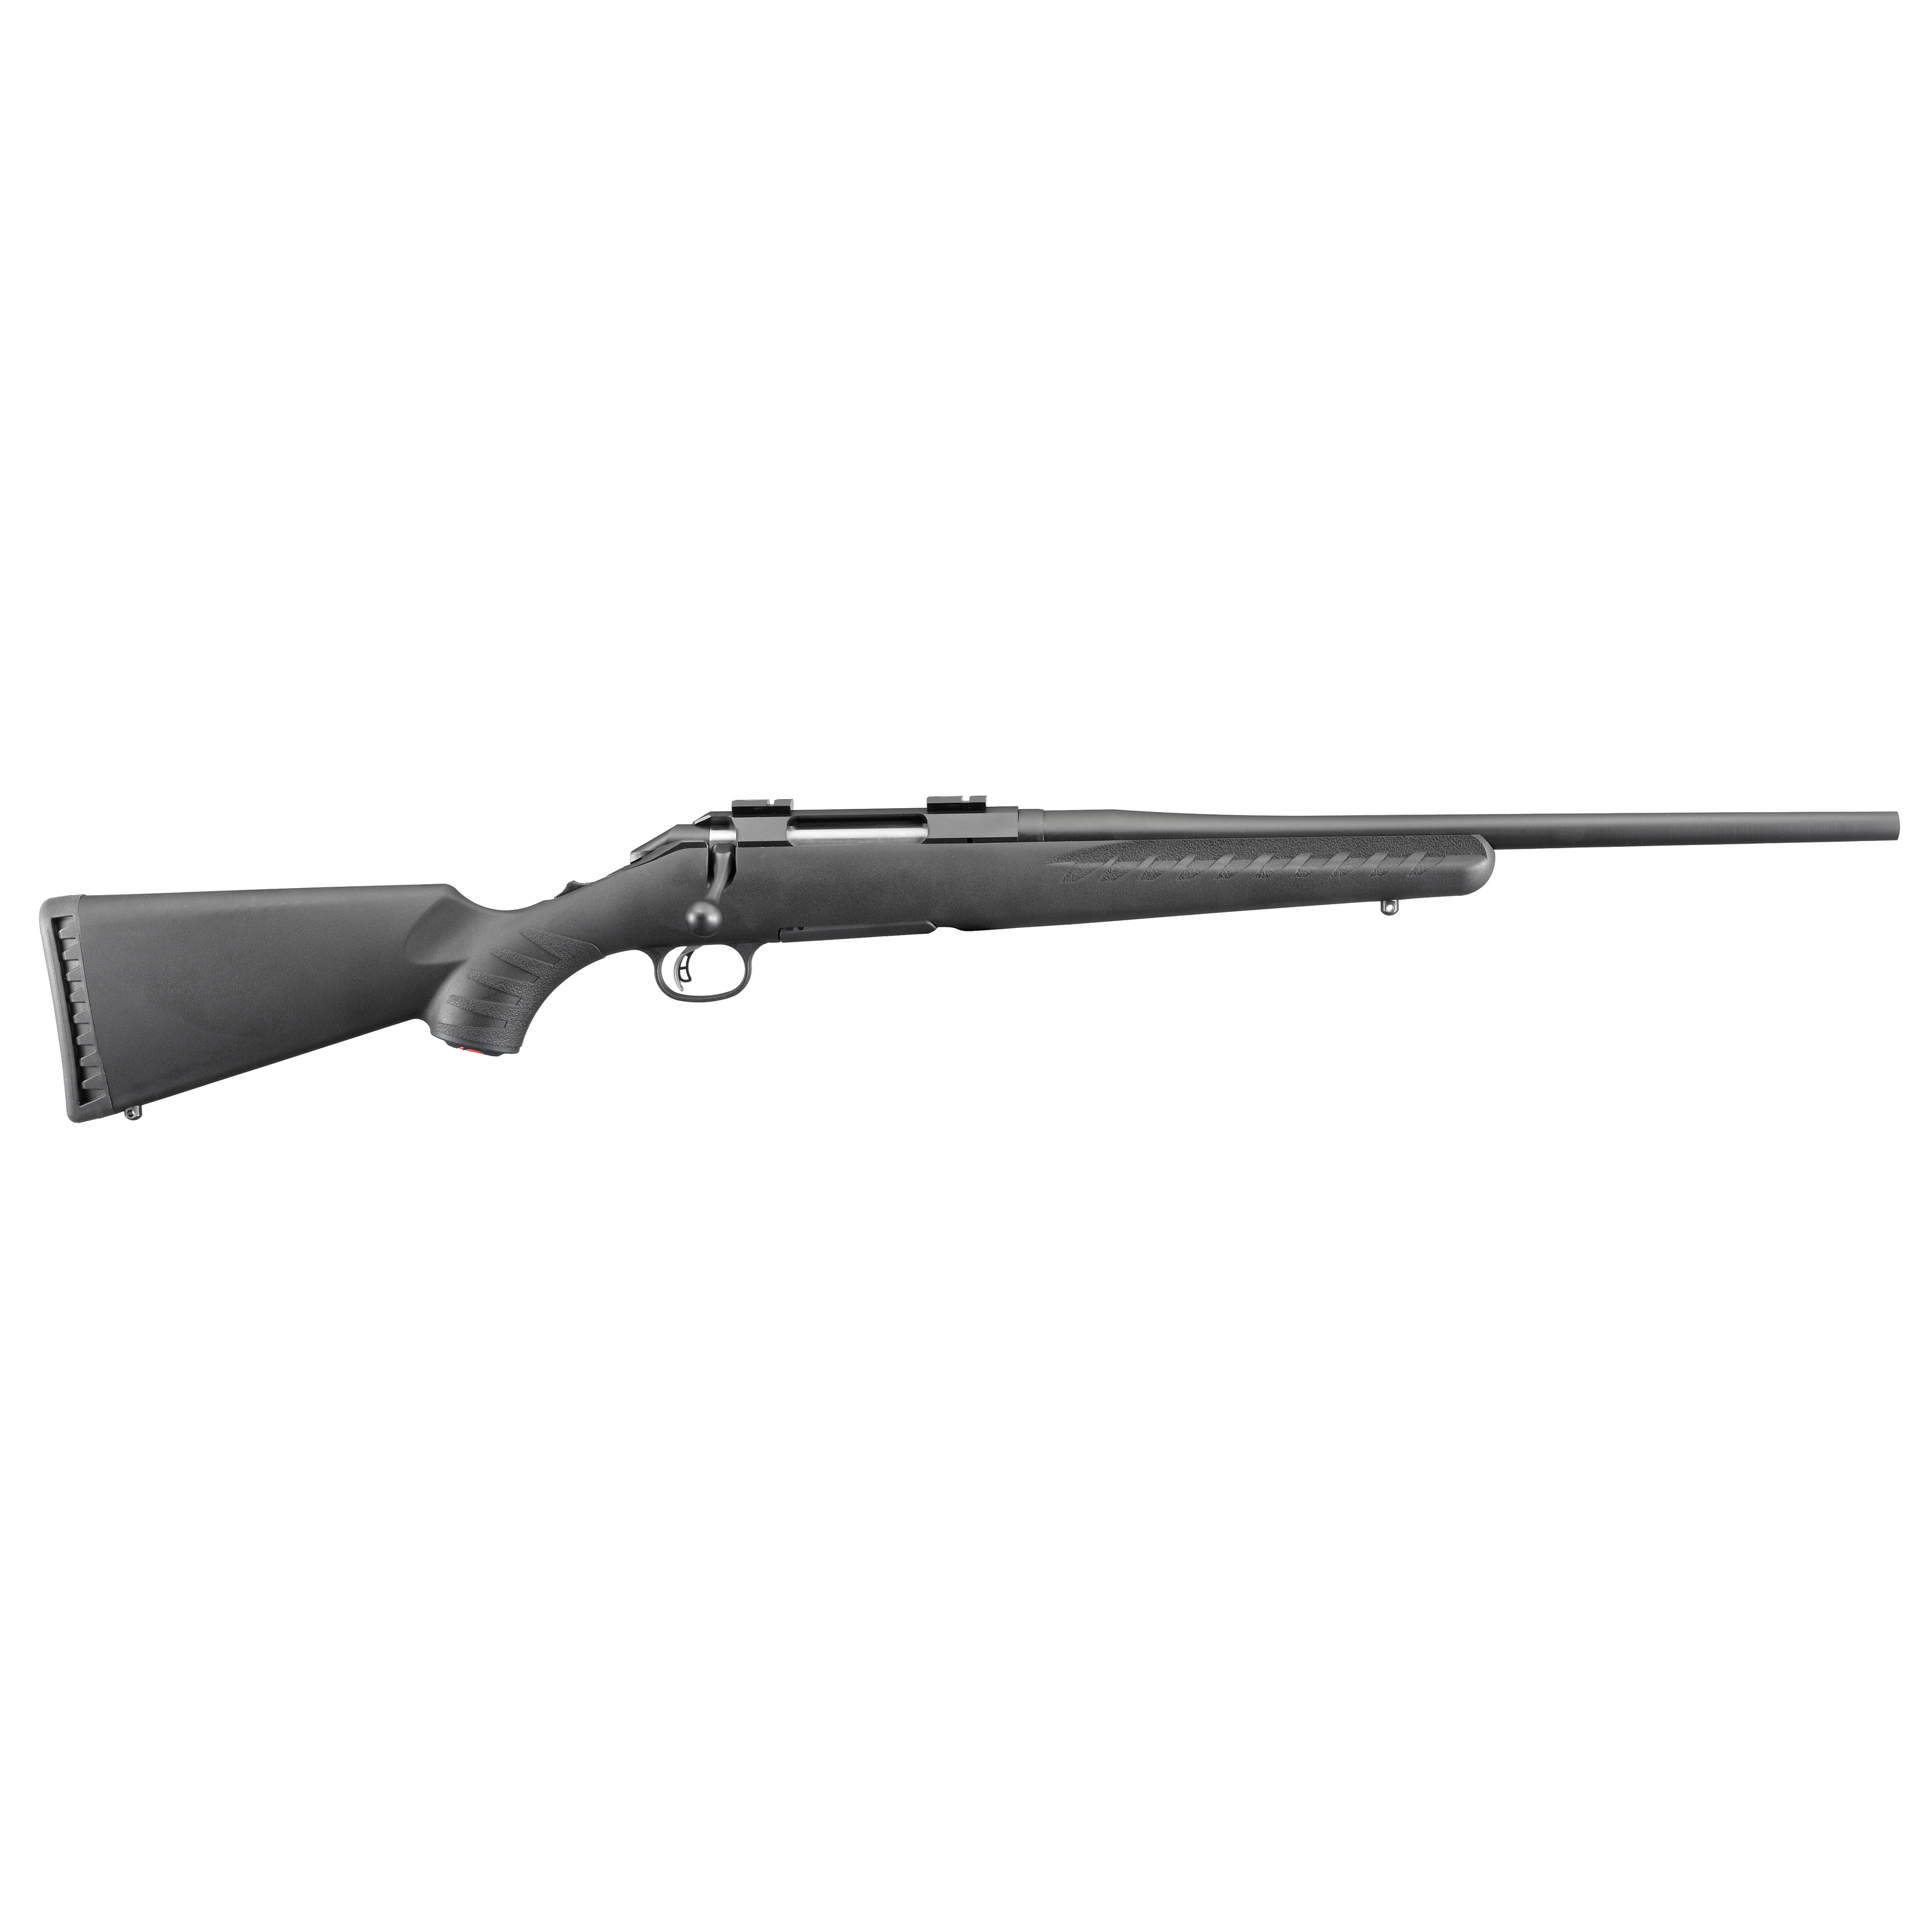 RUGER AMERICAN CMP 308WIN 18 4RD